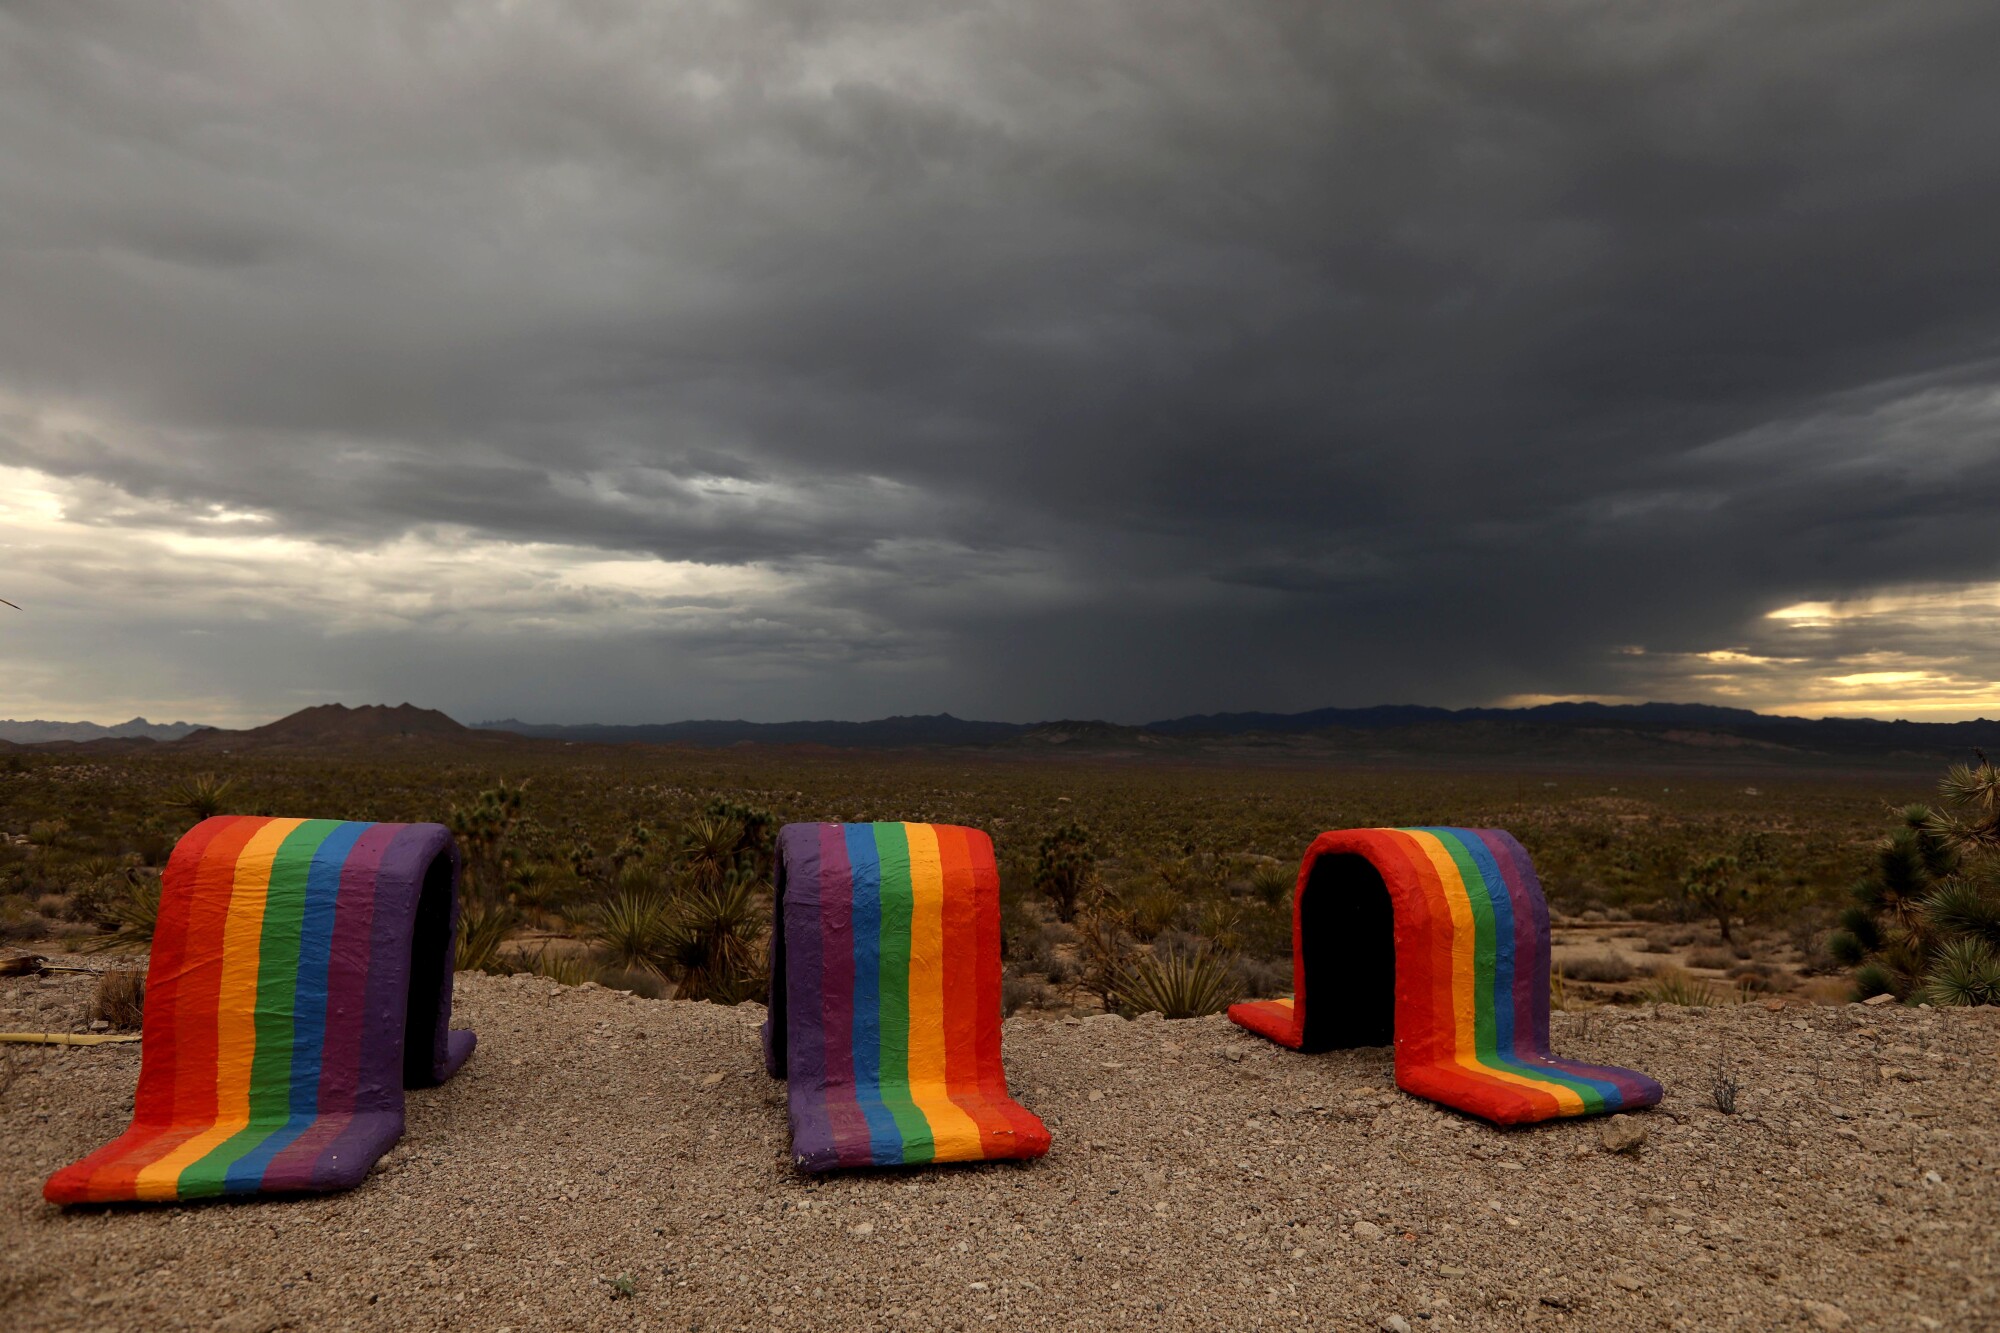 Rainbow-painted arches sit in a desert landscape.